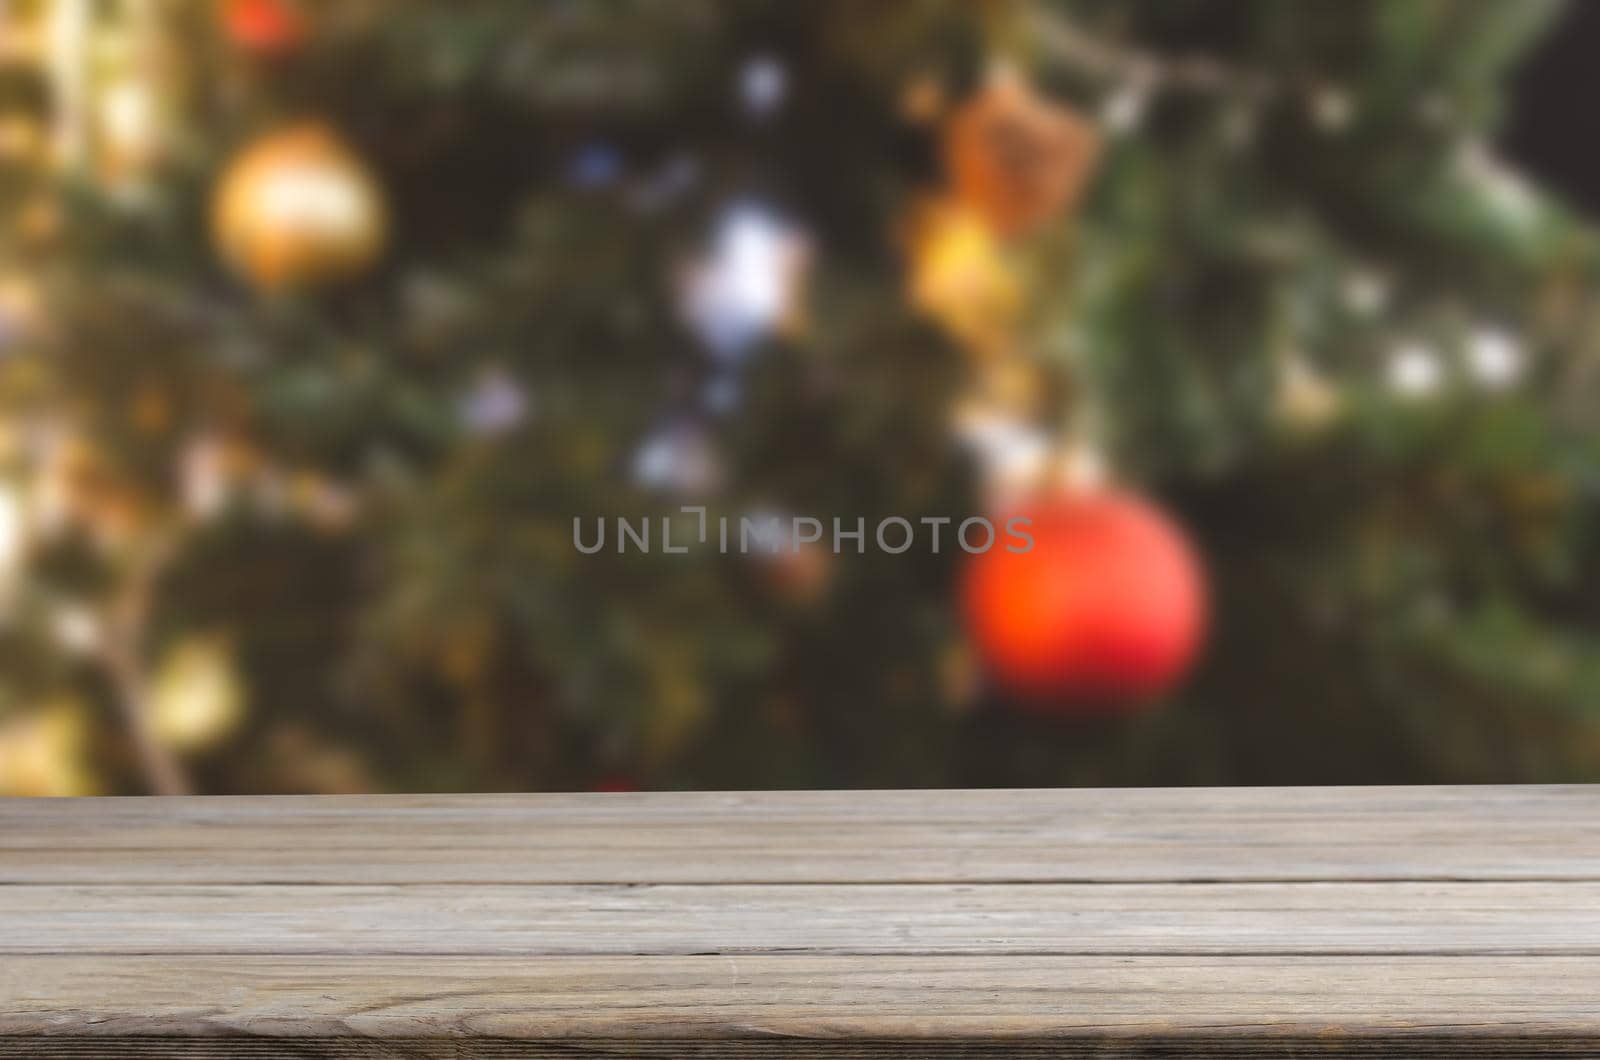 wood table top product empty counter abstract blur background New year and Christmas festive decoration display vintage retro tone.